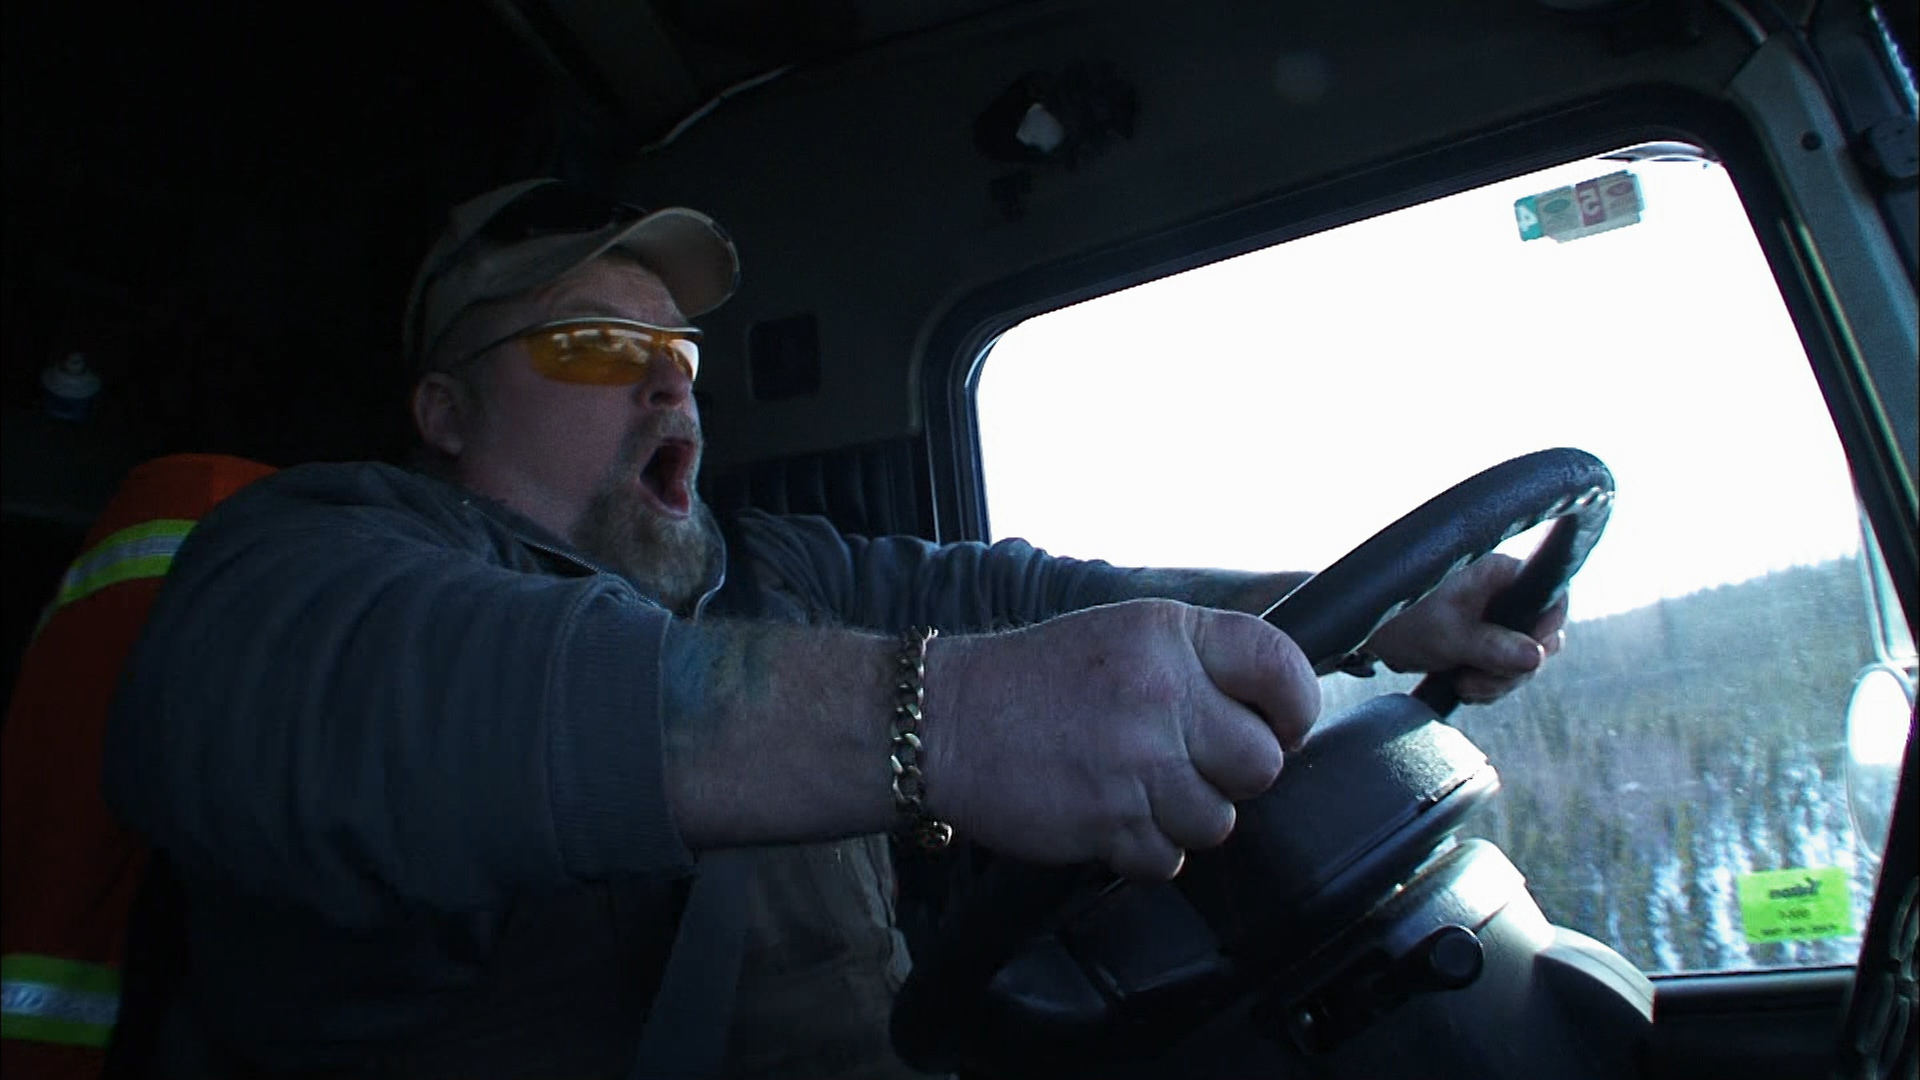 Ice Road Truckers' is officially back in emotional fashion